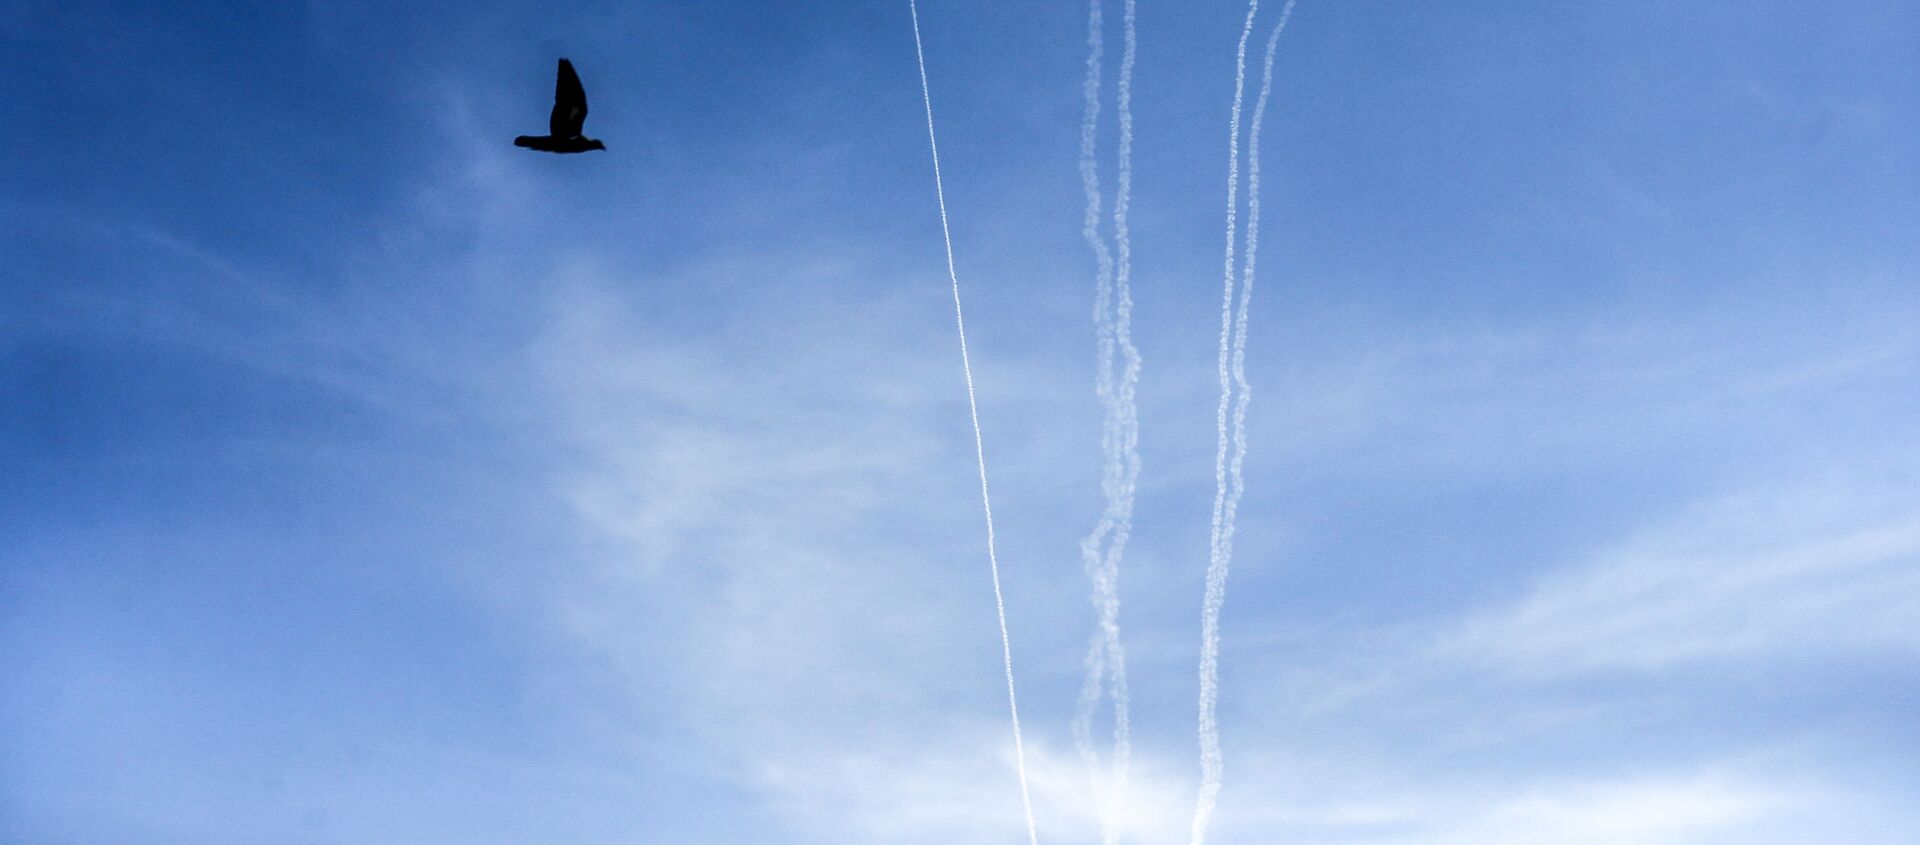 This picture taken on August 10, 2020 from Gaza City shows a bird flying while behind are seen smoke trails from test rockets fired by the Palestinian Islamist Hamas movement which currently controls the Gaza Strip, as part of military drills. - Sputnik International, 1920, 28.08.2020